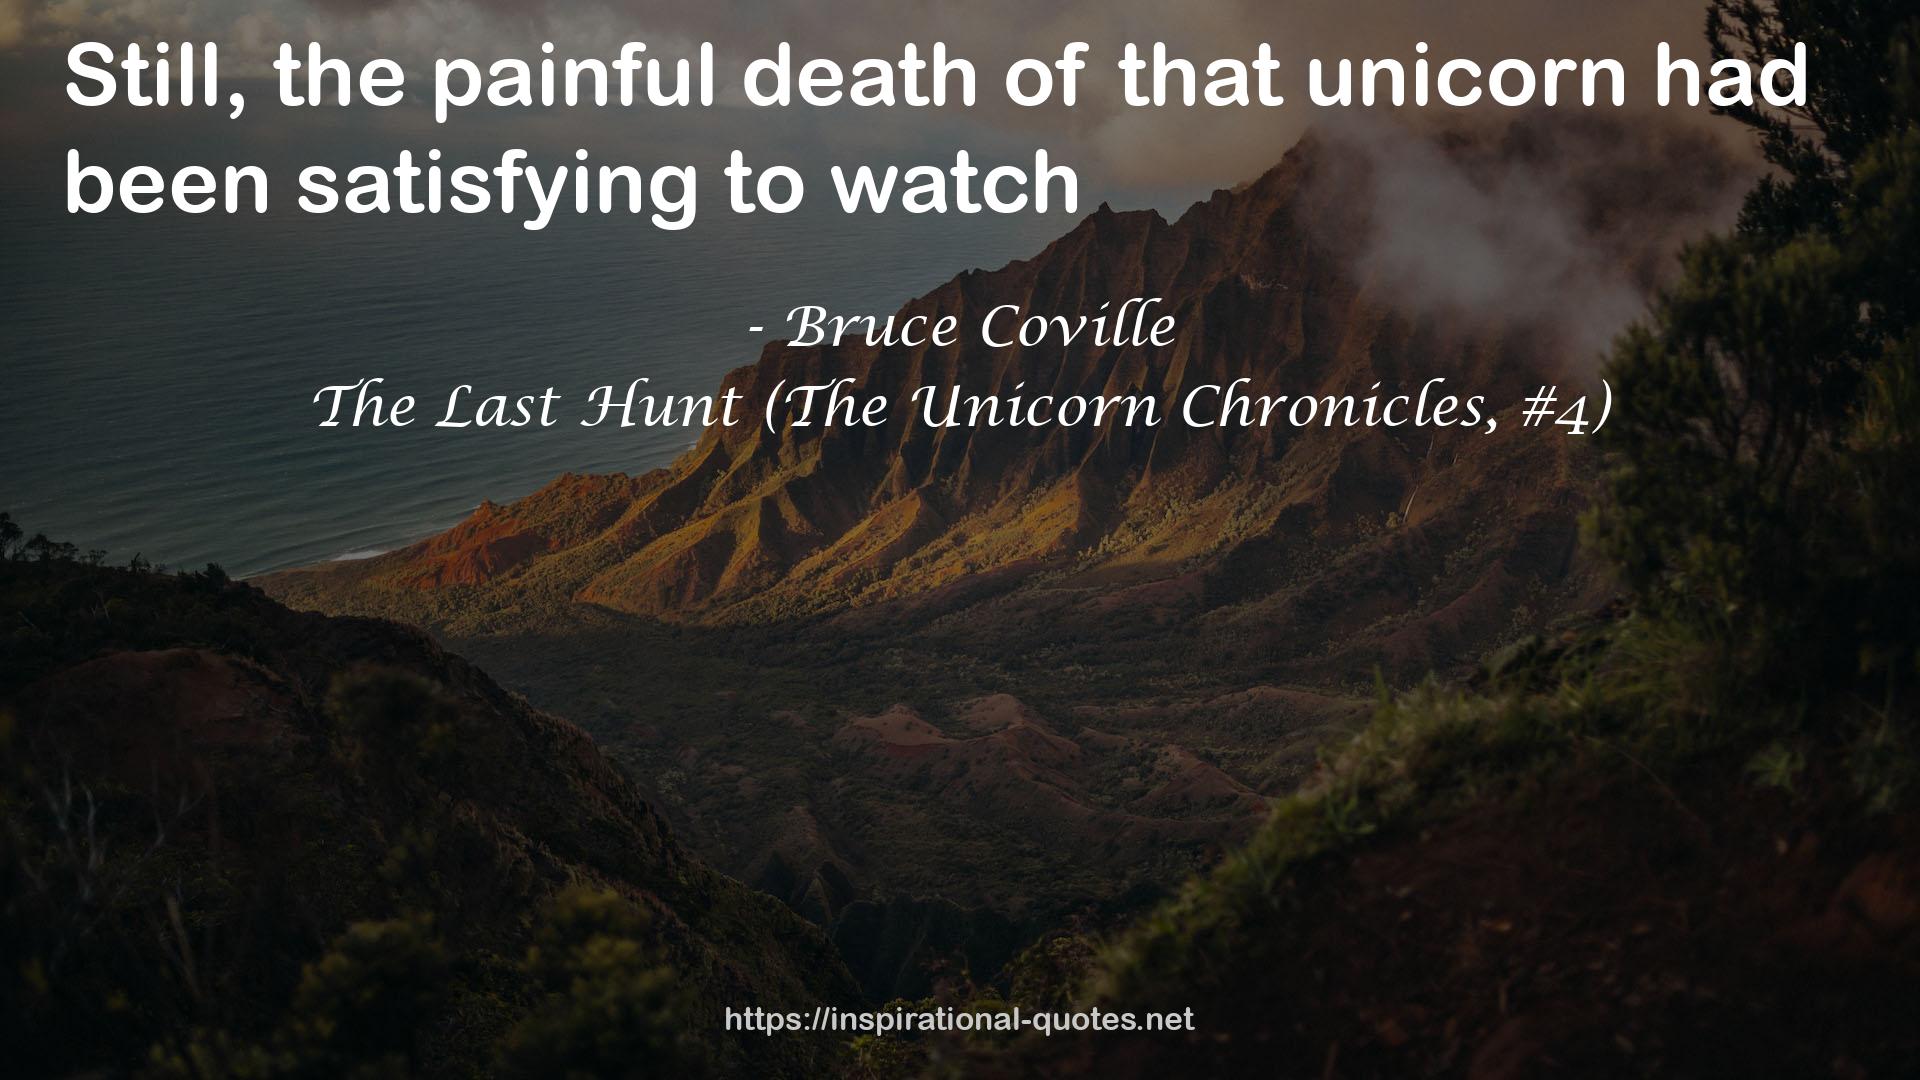 The Last Hunt (The Unicorn Chronicles, #4) QUOTES